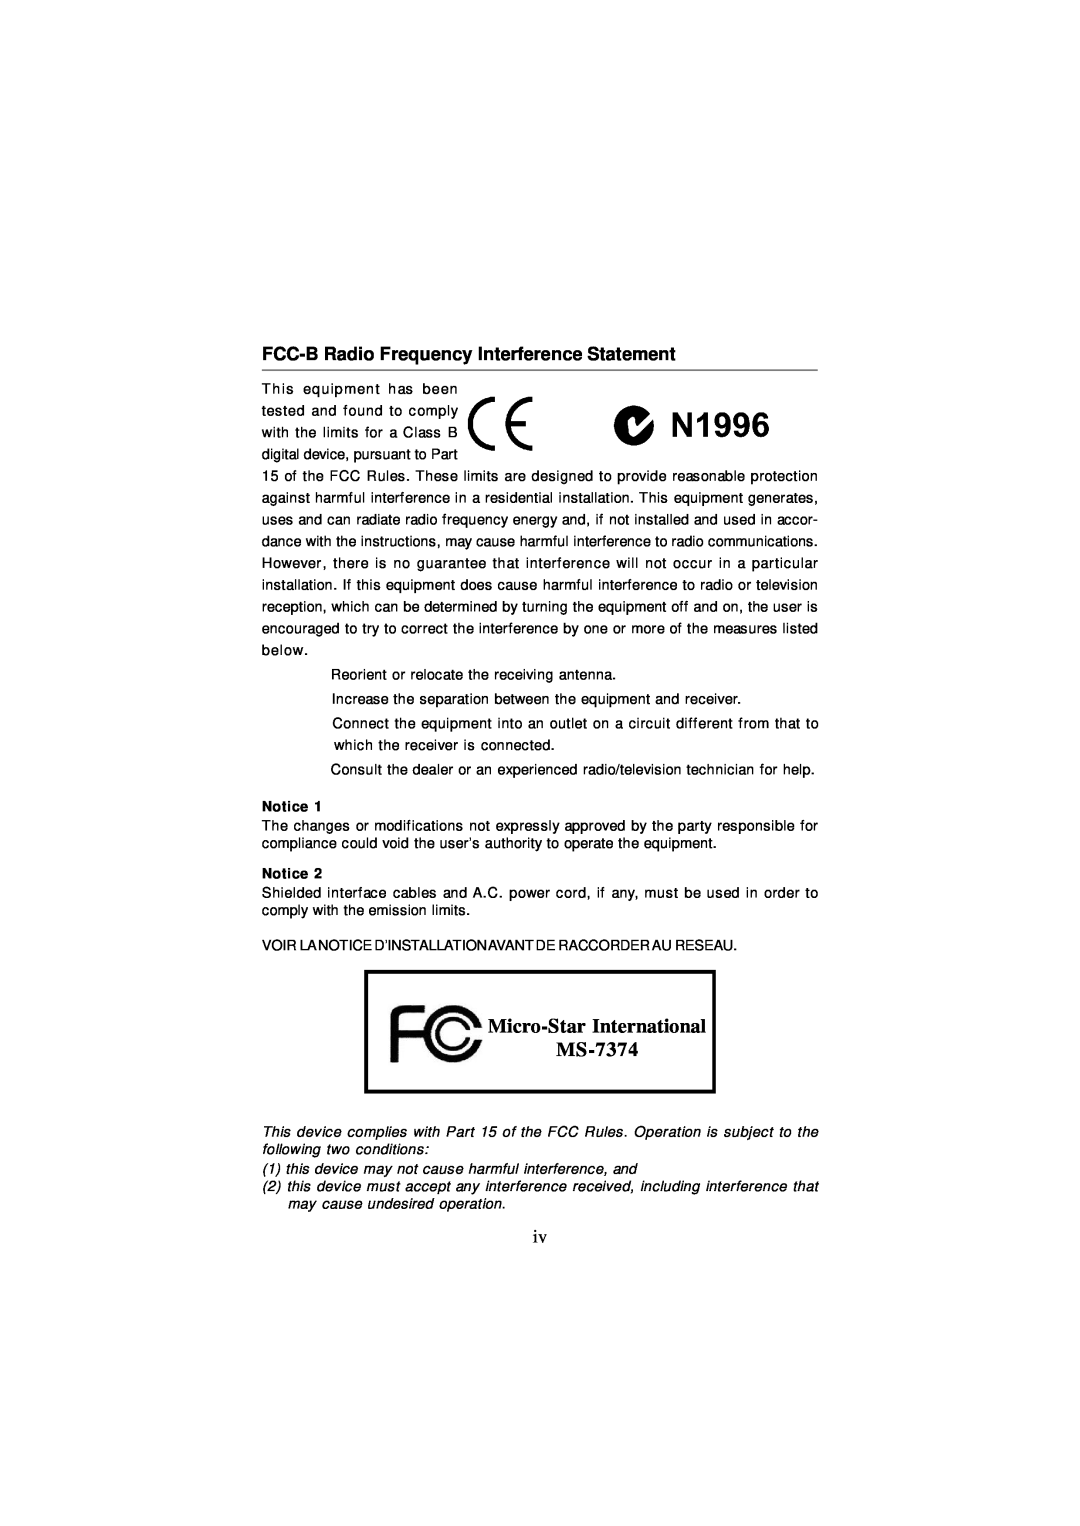 Nvidia manual FCC-B Radio Frequency Interference Statement, Micro-Star International MS-7374 